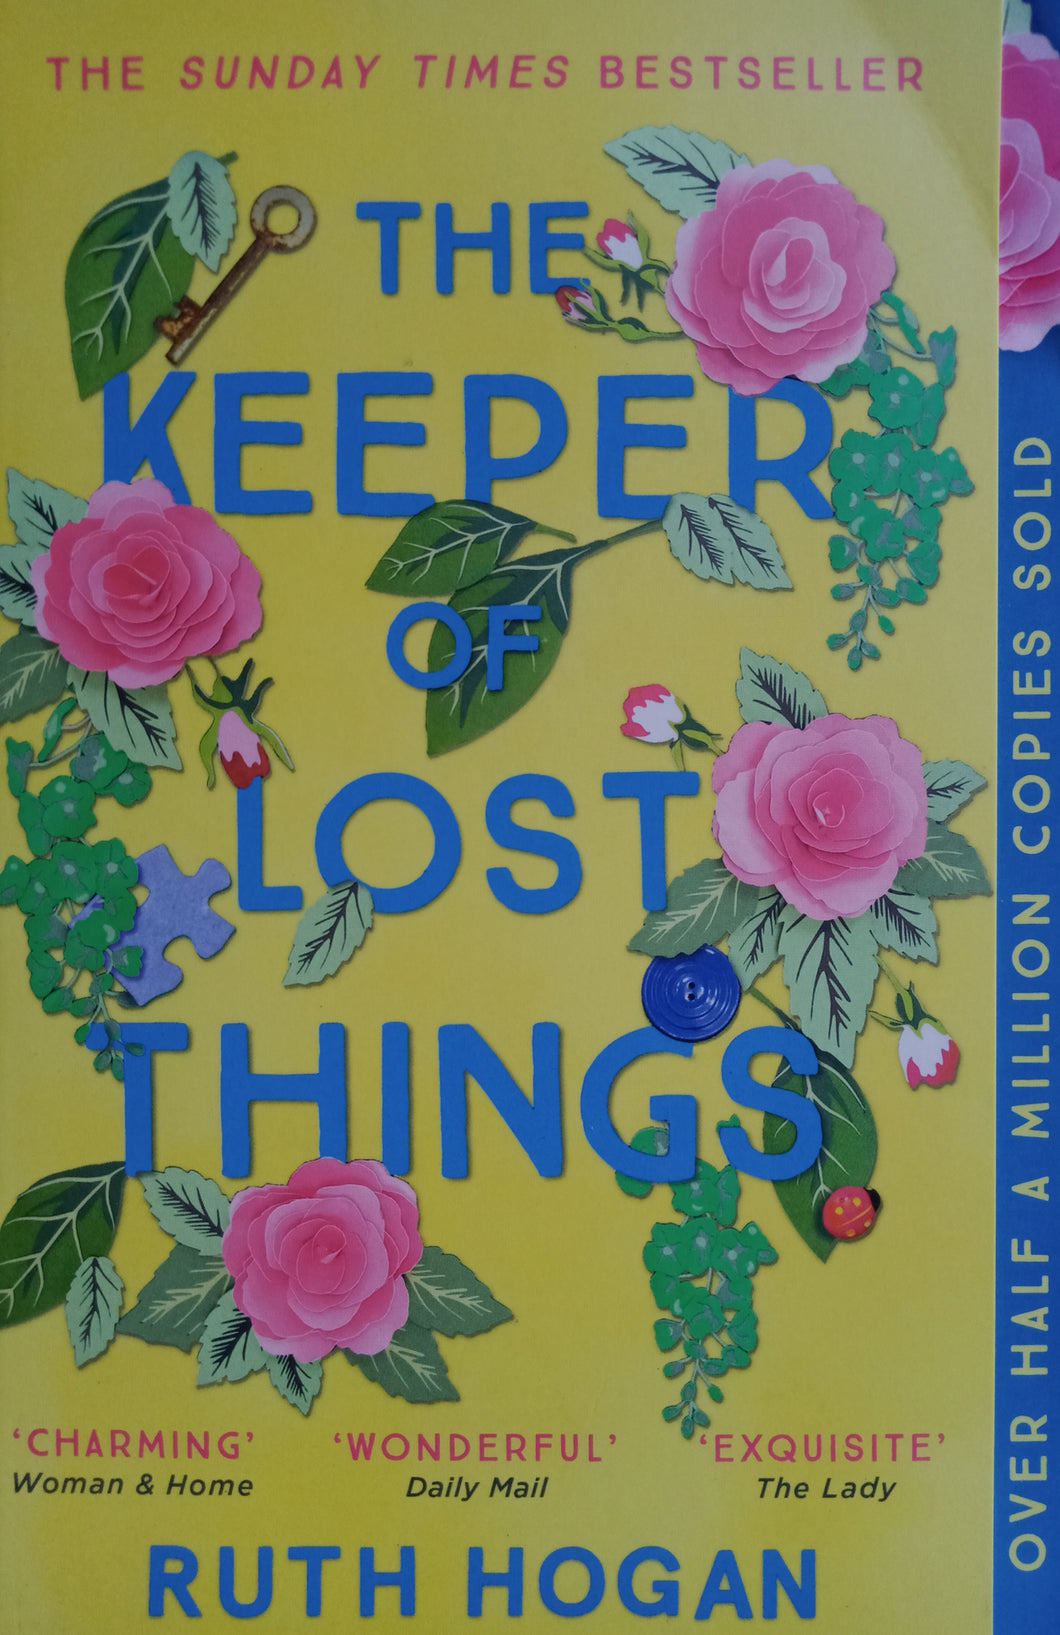 The Keeper Of Lost Things by Ruth Hogan